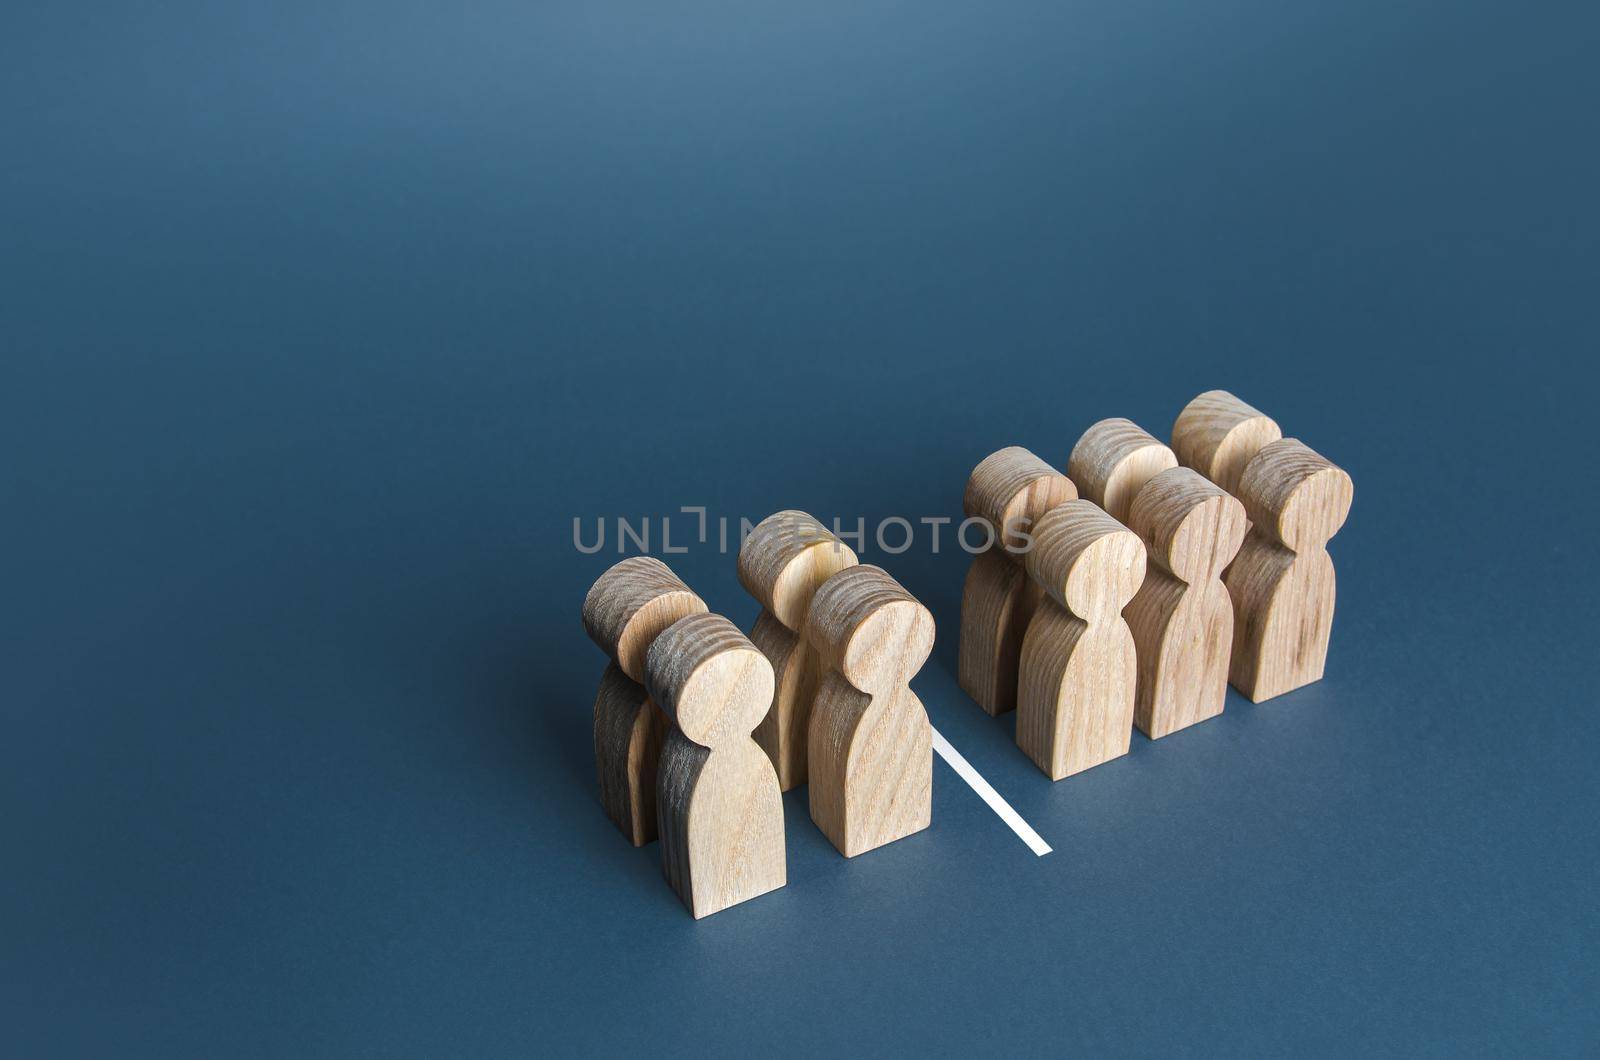 Four out of ten people separated by a line. Visualization of statistical data. 40% of 100%. Polls test results. Equality in numbers. Dividing people into two groups on different issues.